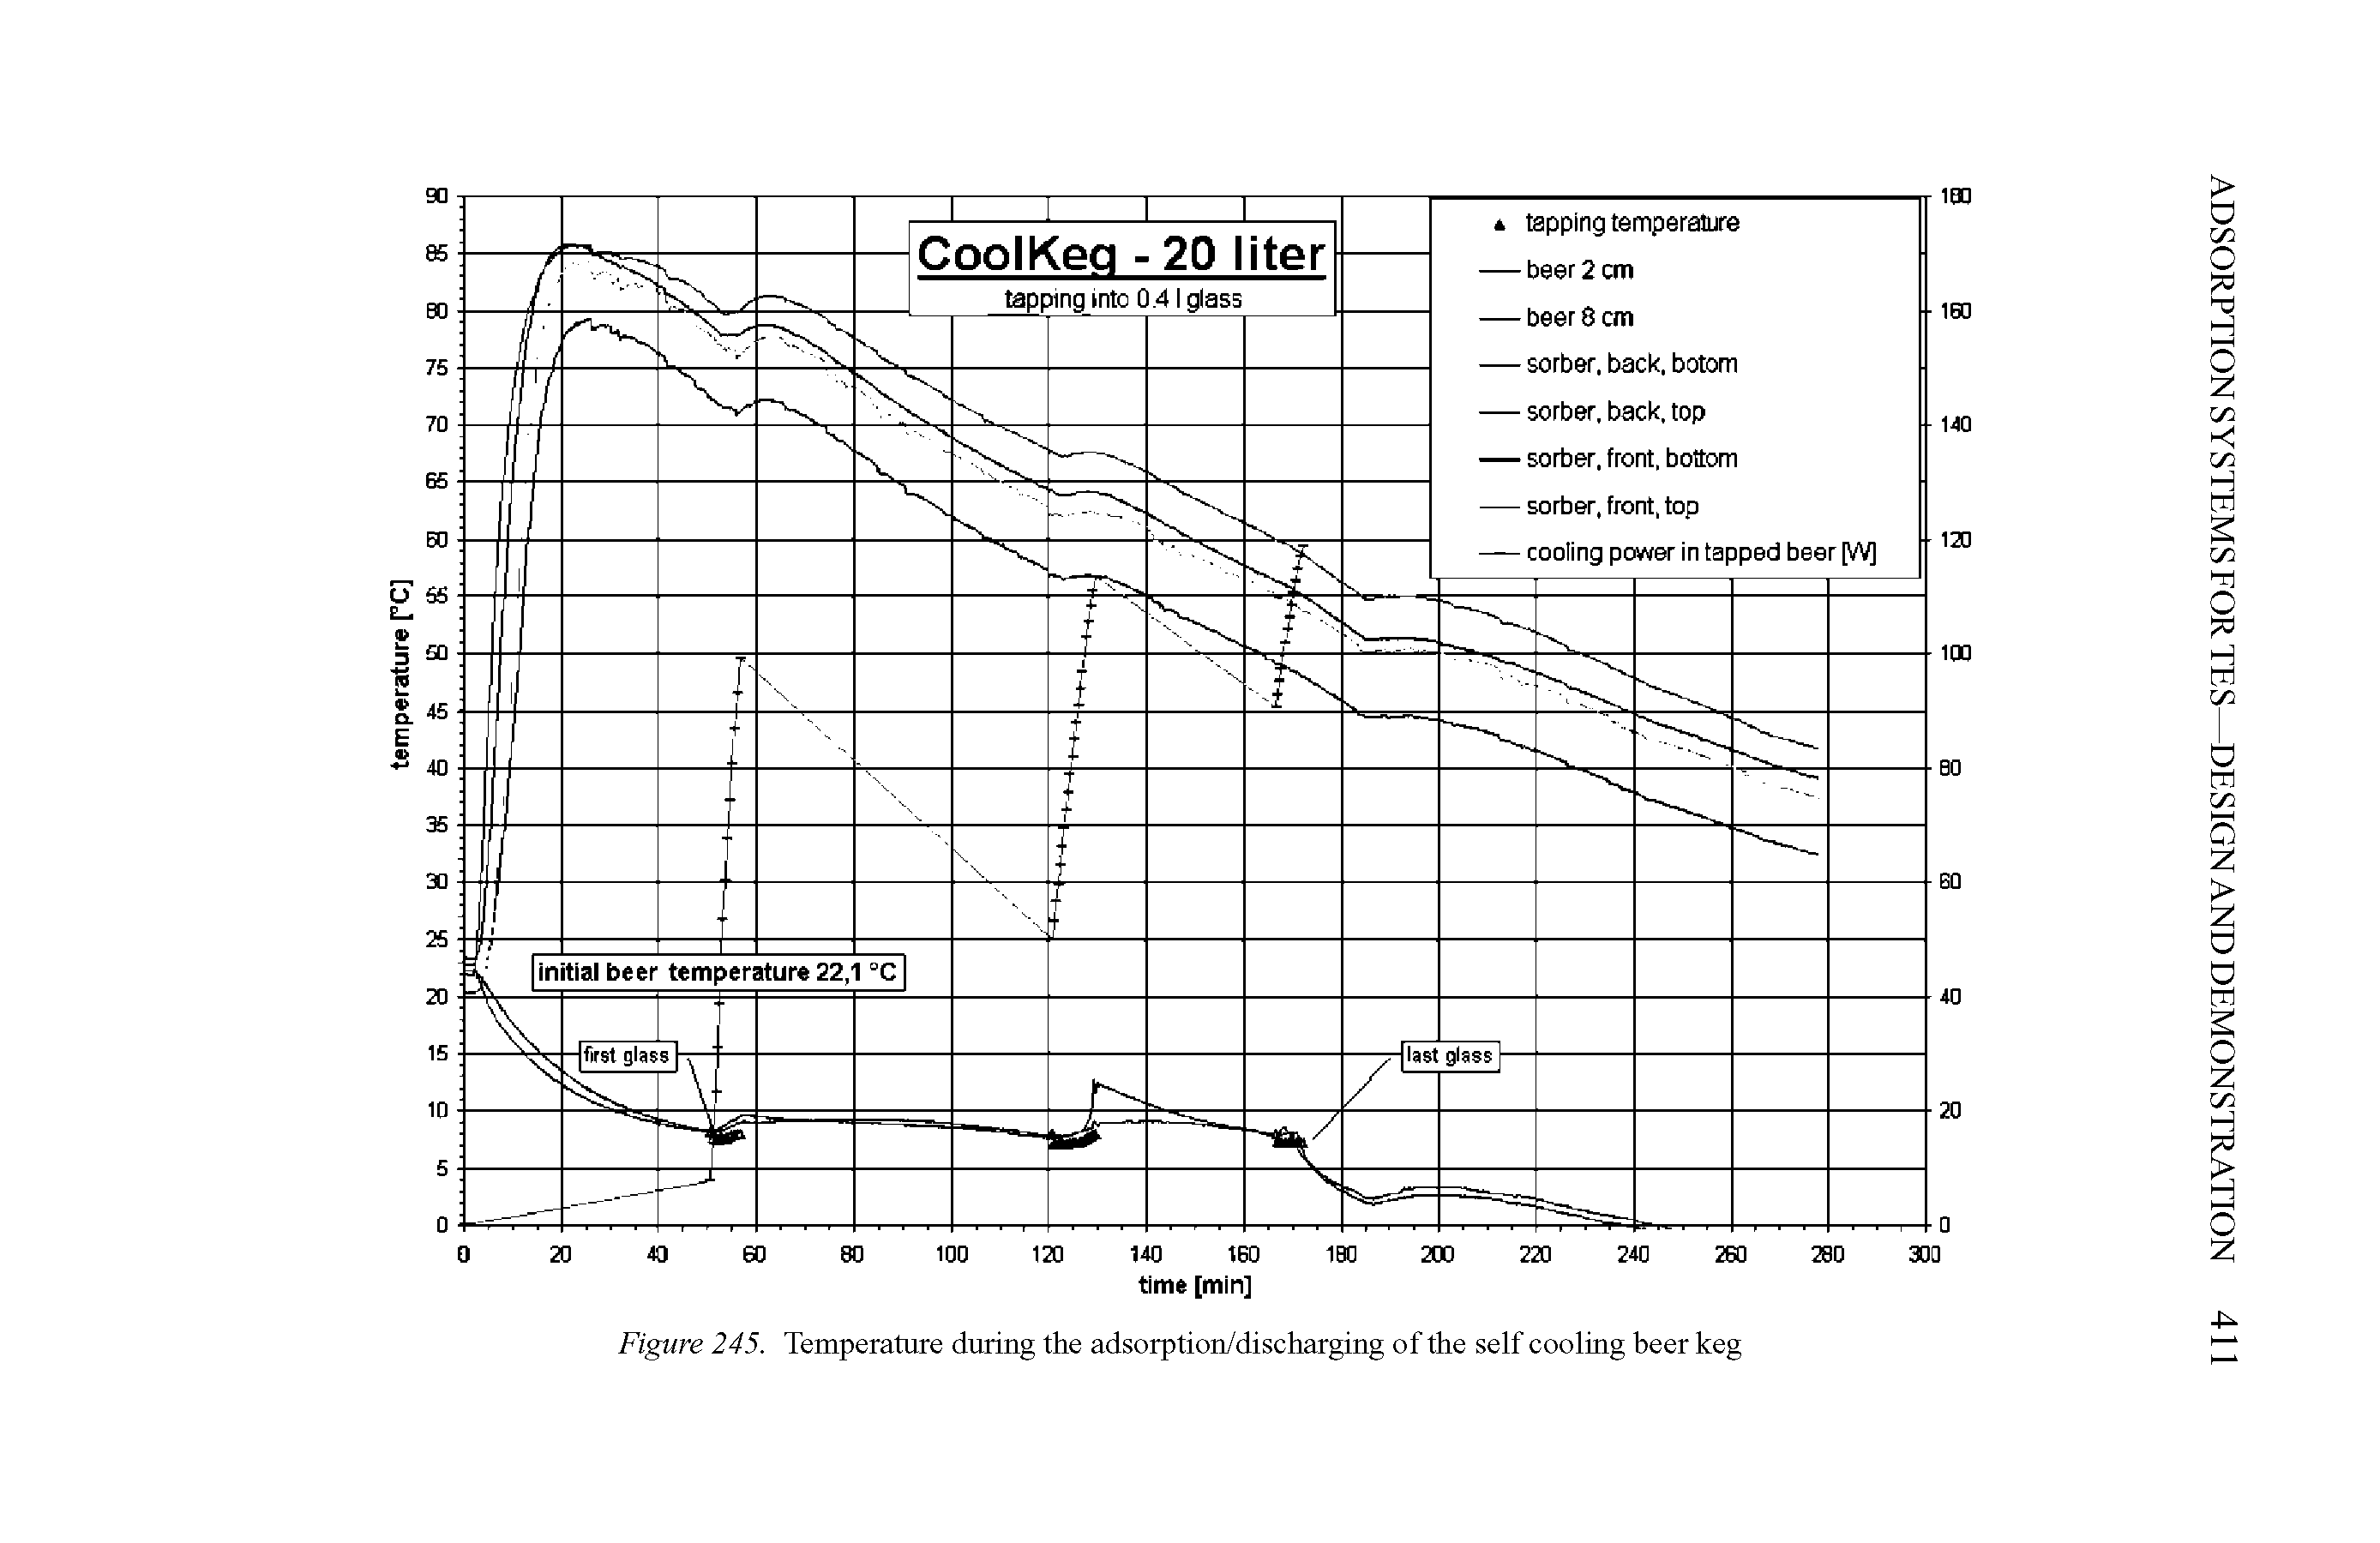 Figure 245. Temperature during the adsorption/discharging of the self cooling beer keg...